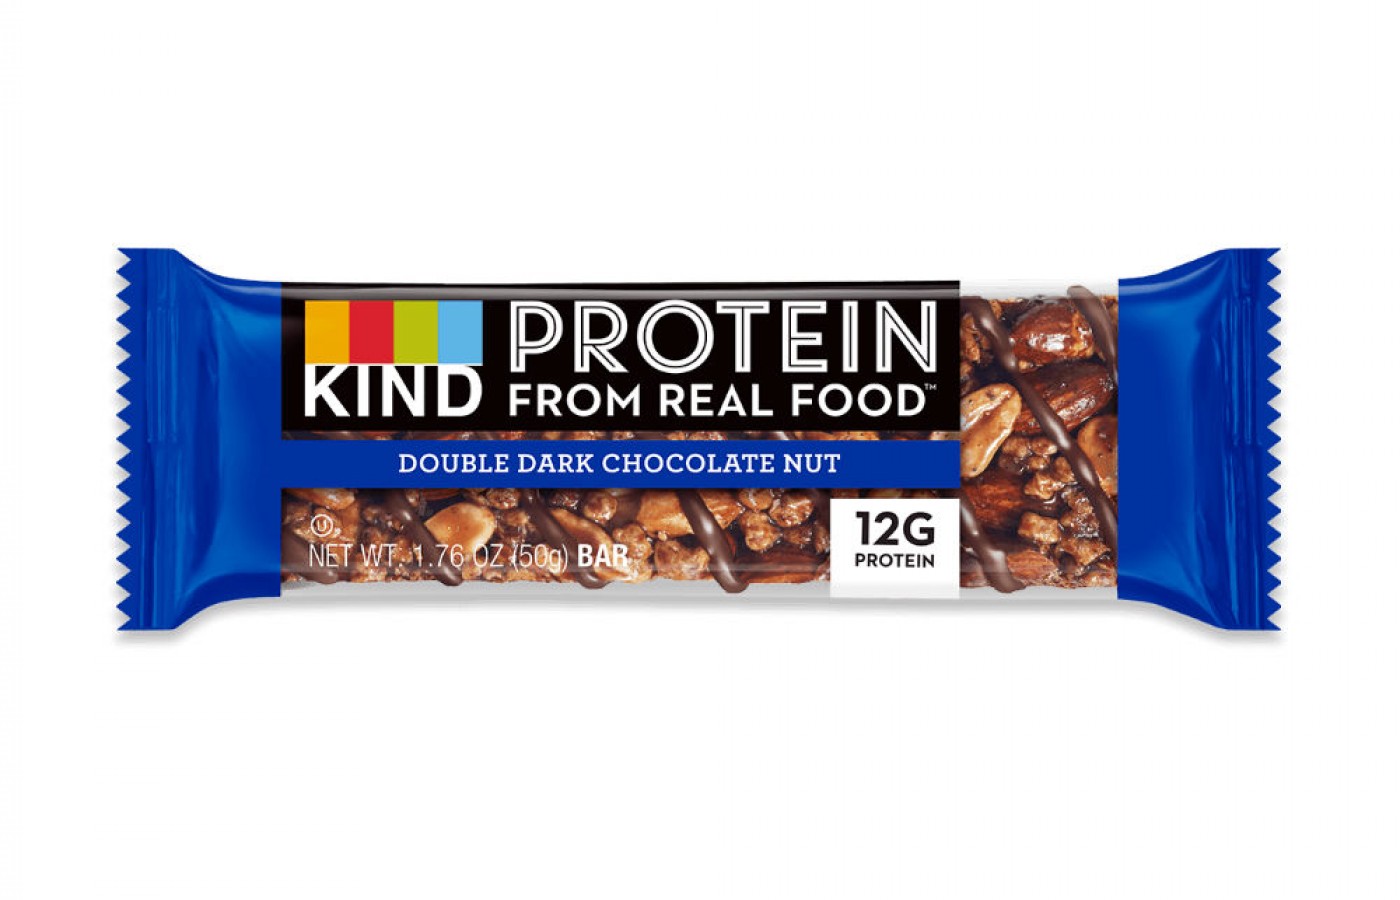 A nutty protein bar by Kind.